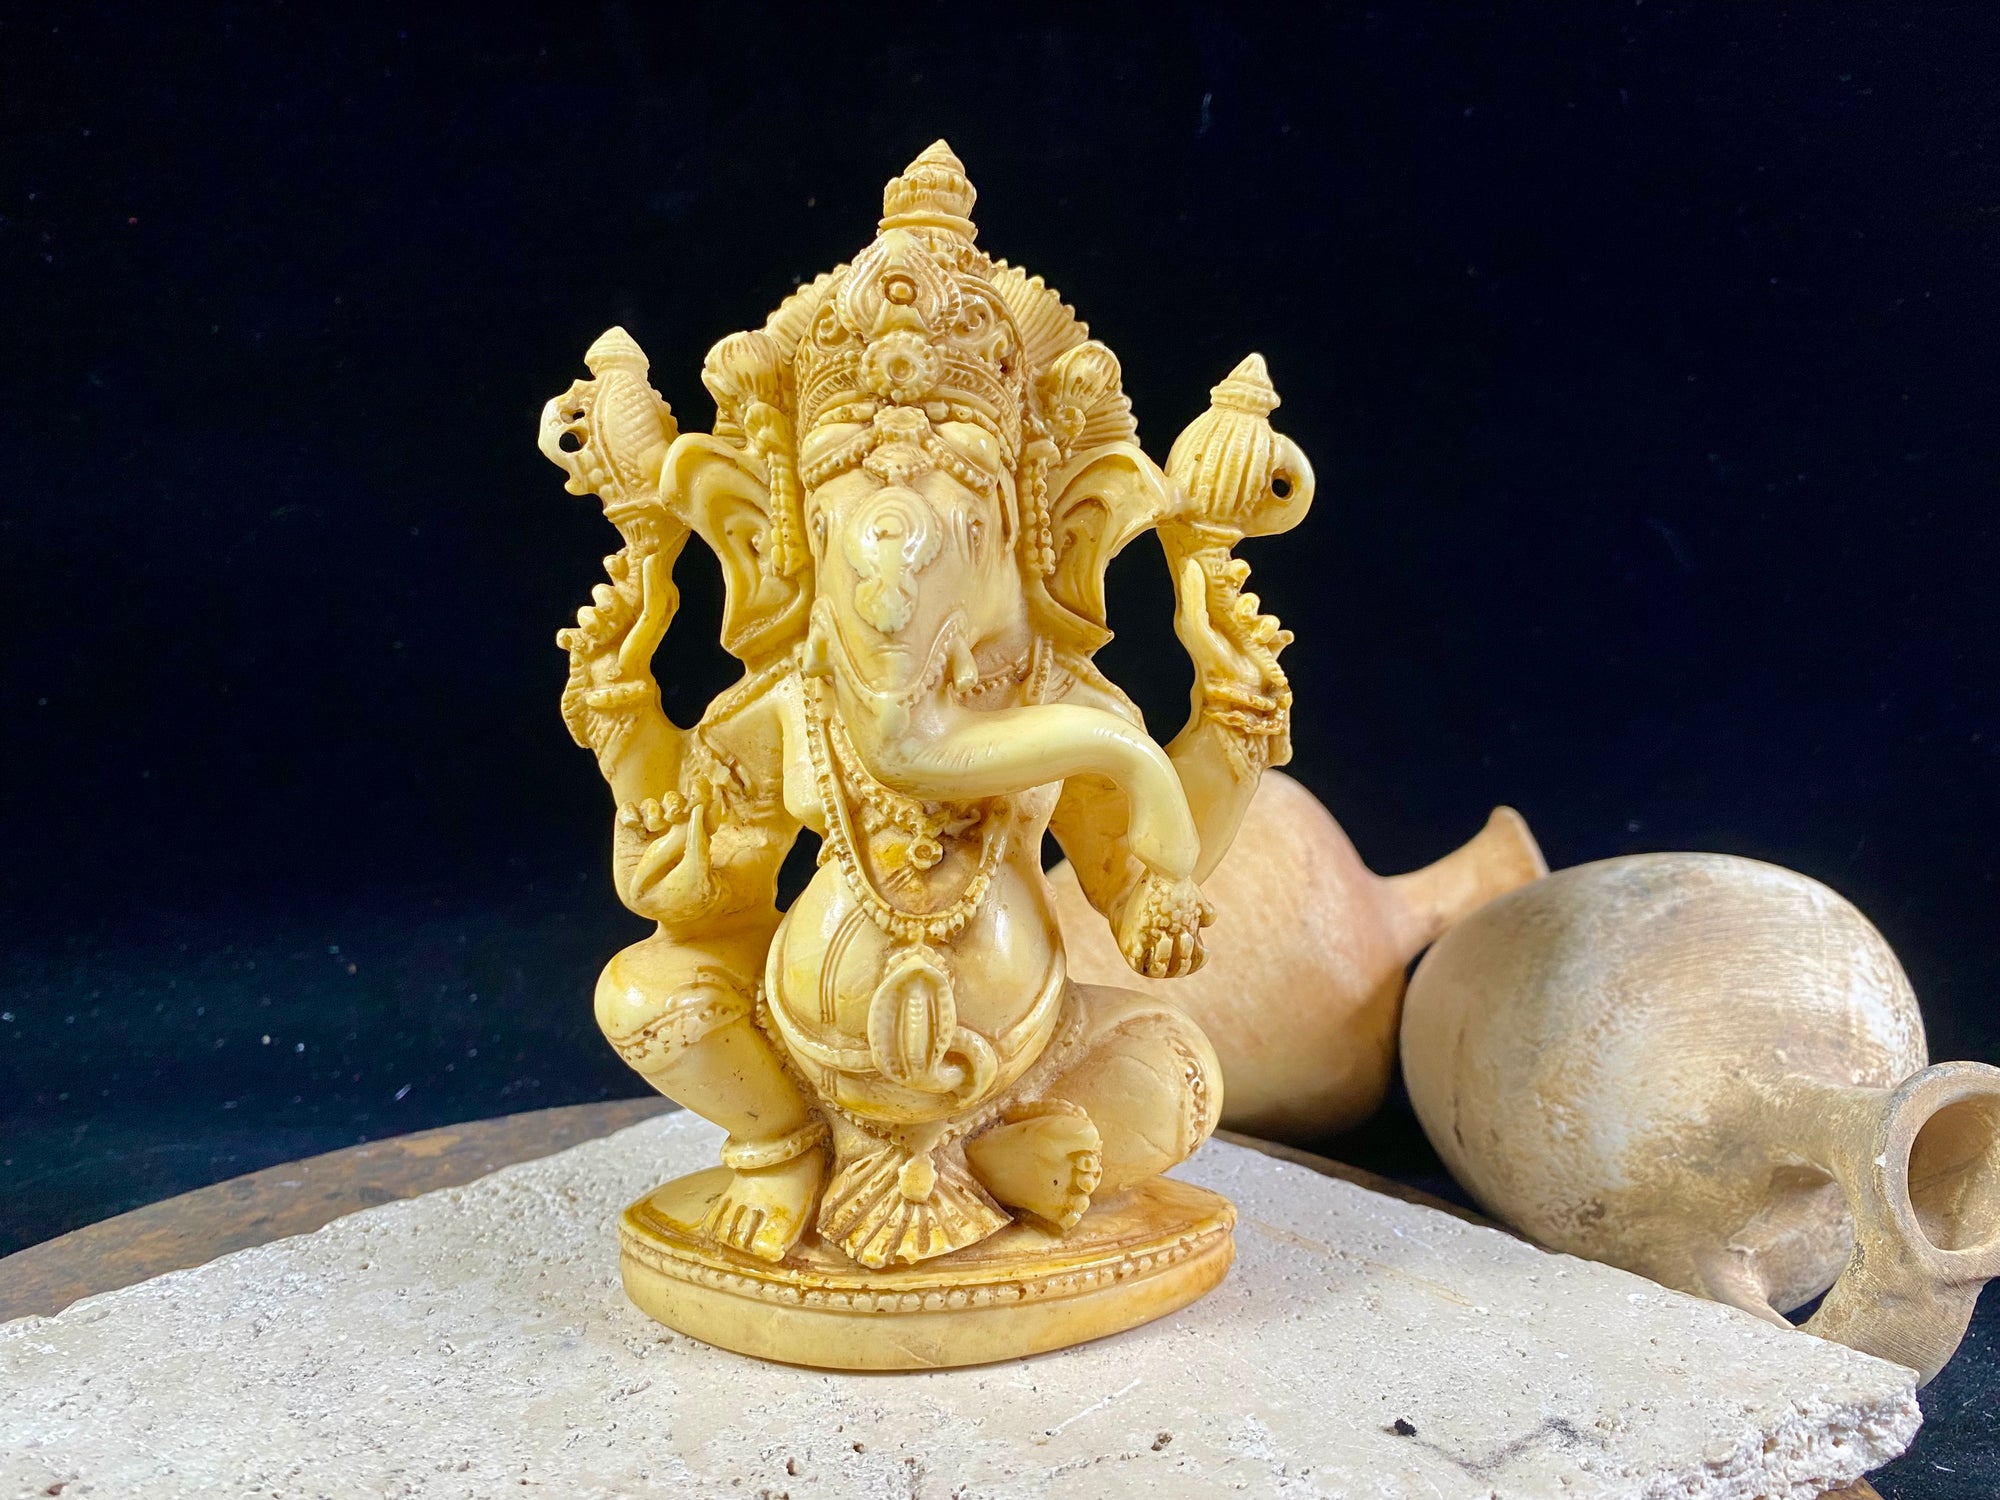 This is an exquisite Ganesh statue cast in cream coloured resin. Our very detailed Ganesh is hand finished to a very high standard. Measurements: height 16 cm, width 10 cm, depth 6 cm